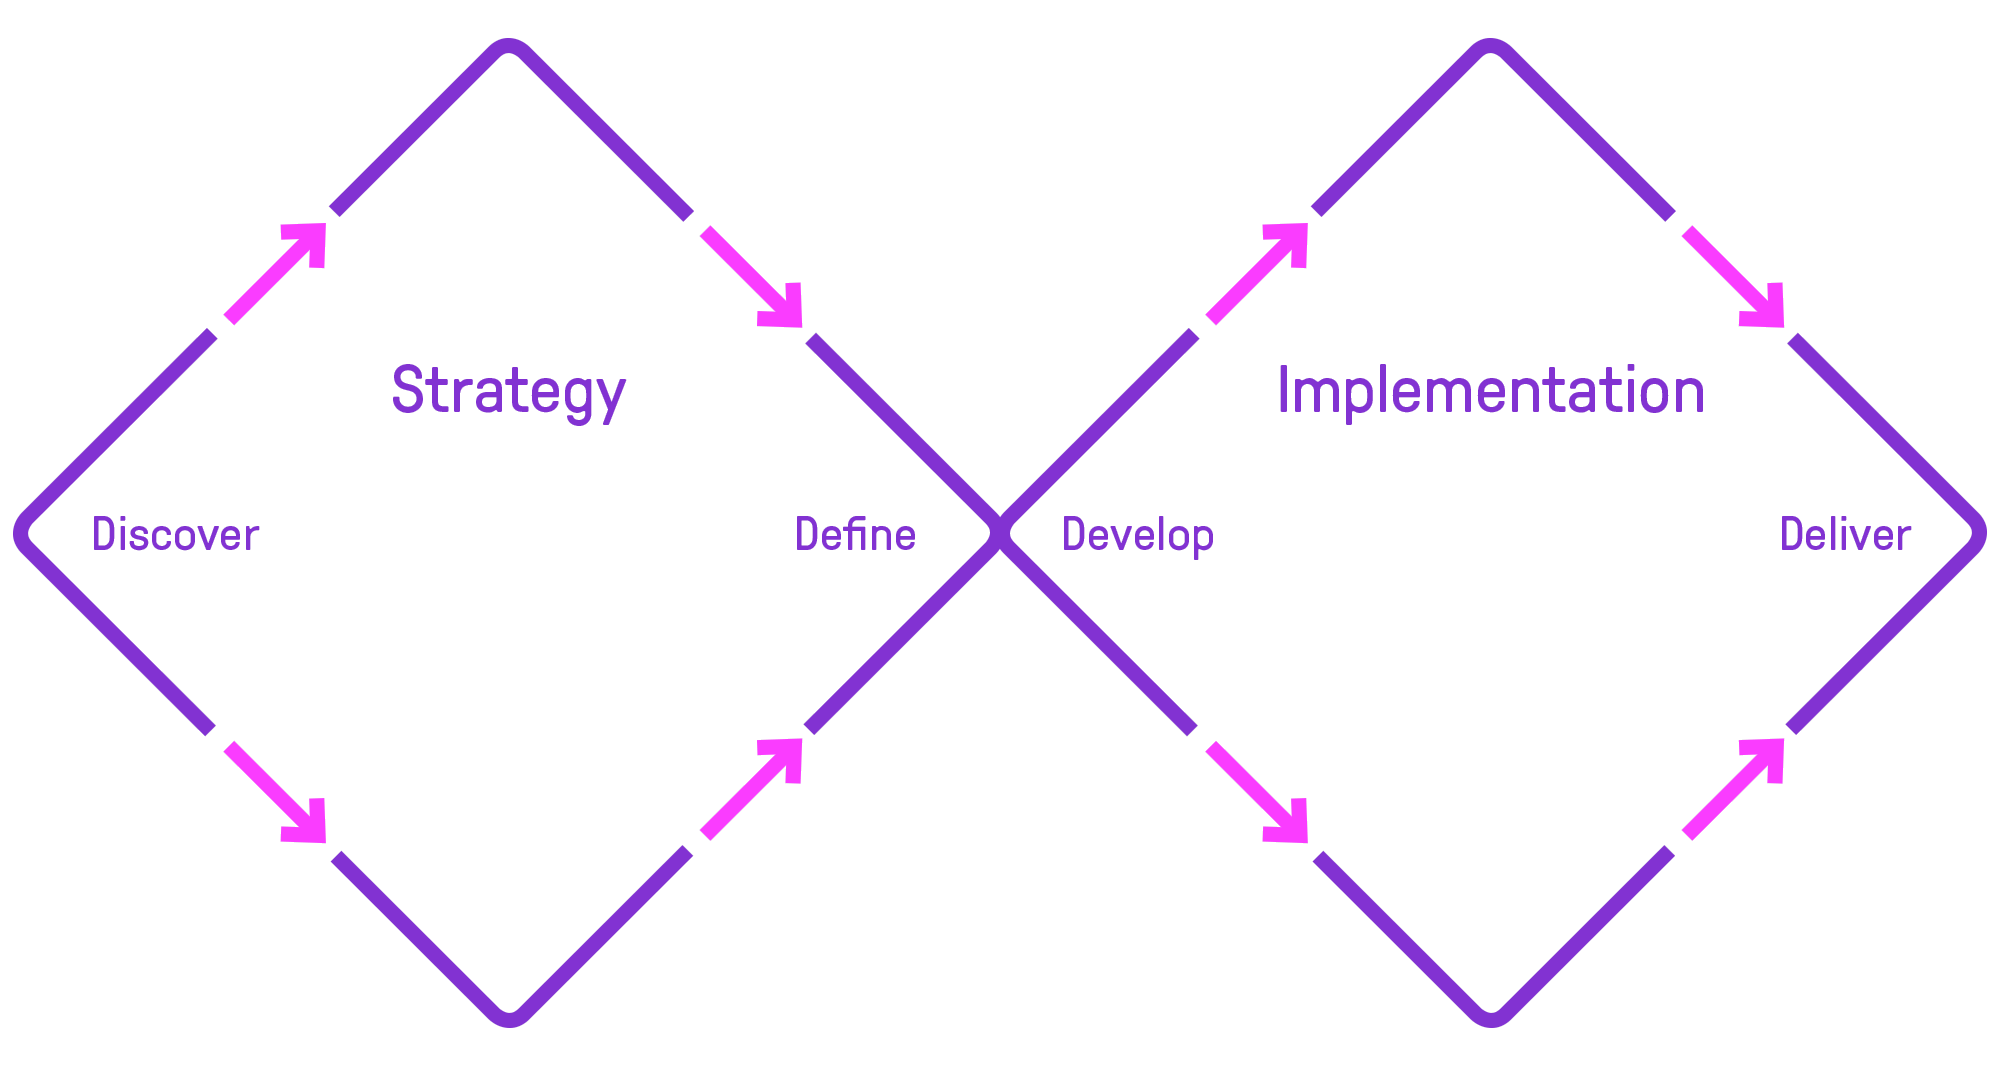 An image showing the four stages of the double diamond process, Discovery, Definition, Development and Delivery